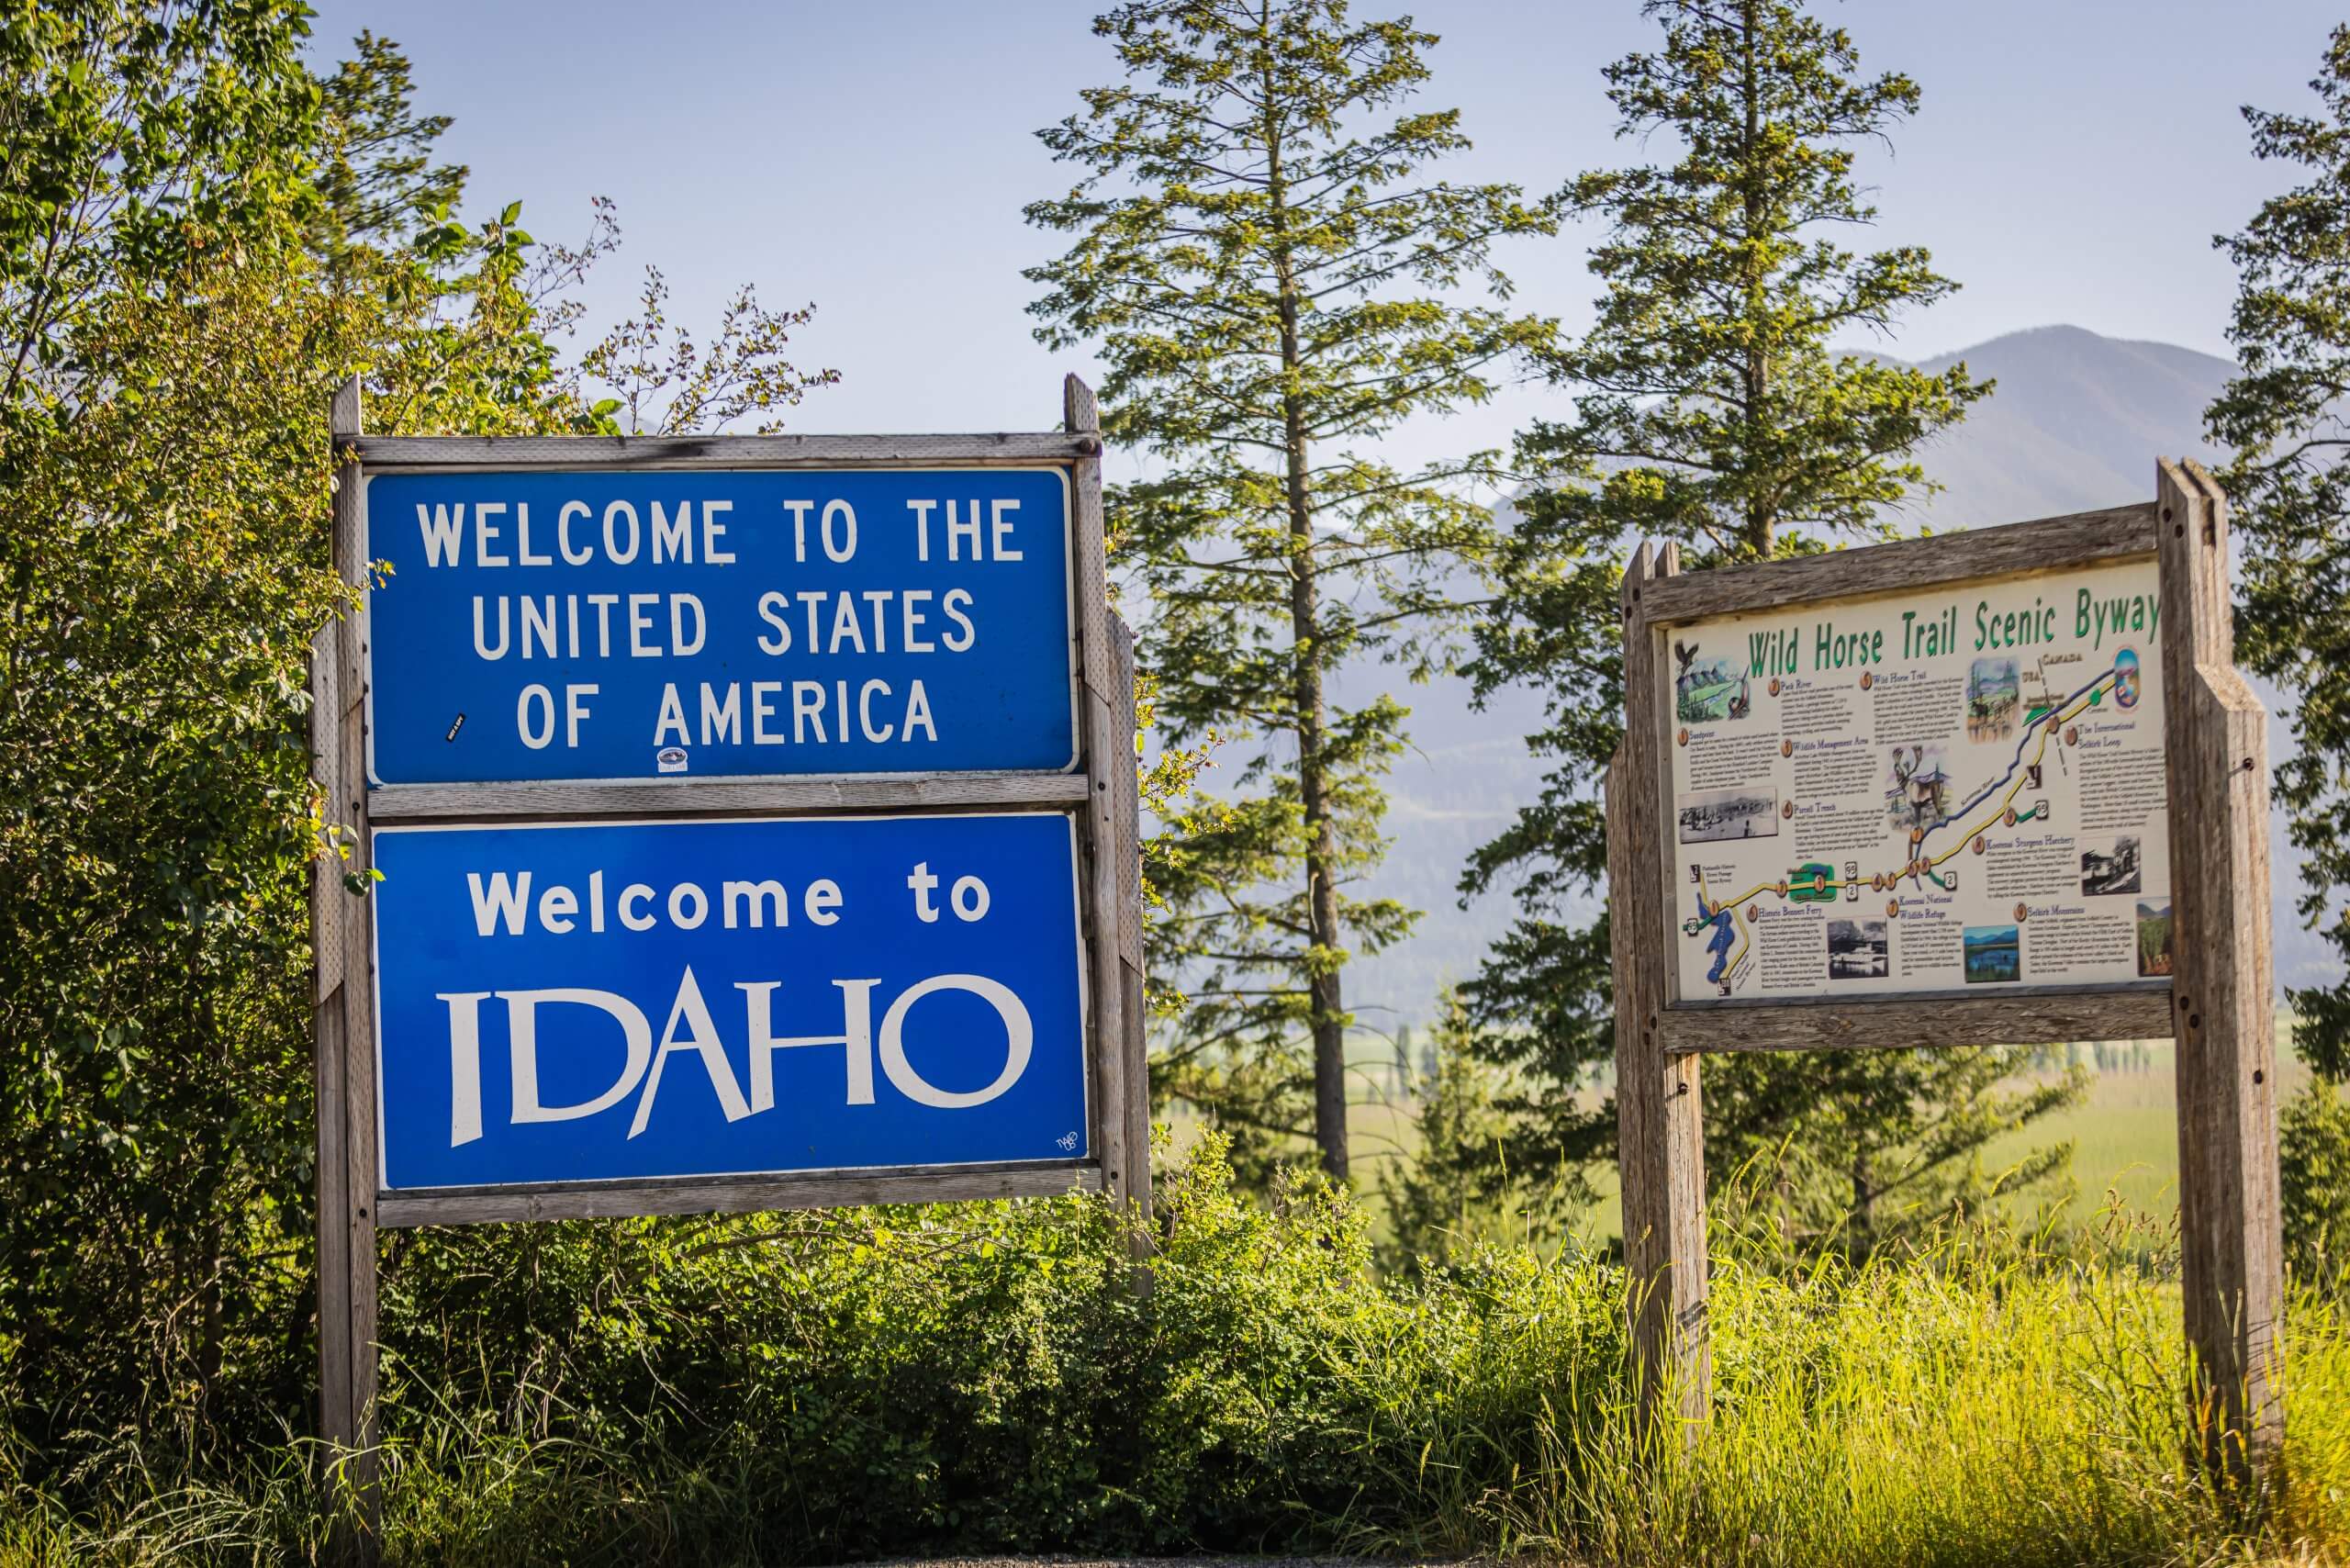 Signage welcoming visitors to the United States and Idaho besides an informational sign about the Wild Horse Trail Scenic Byway.